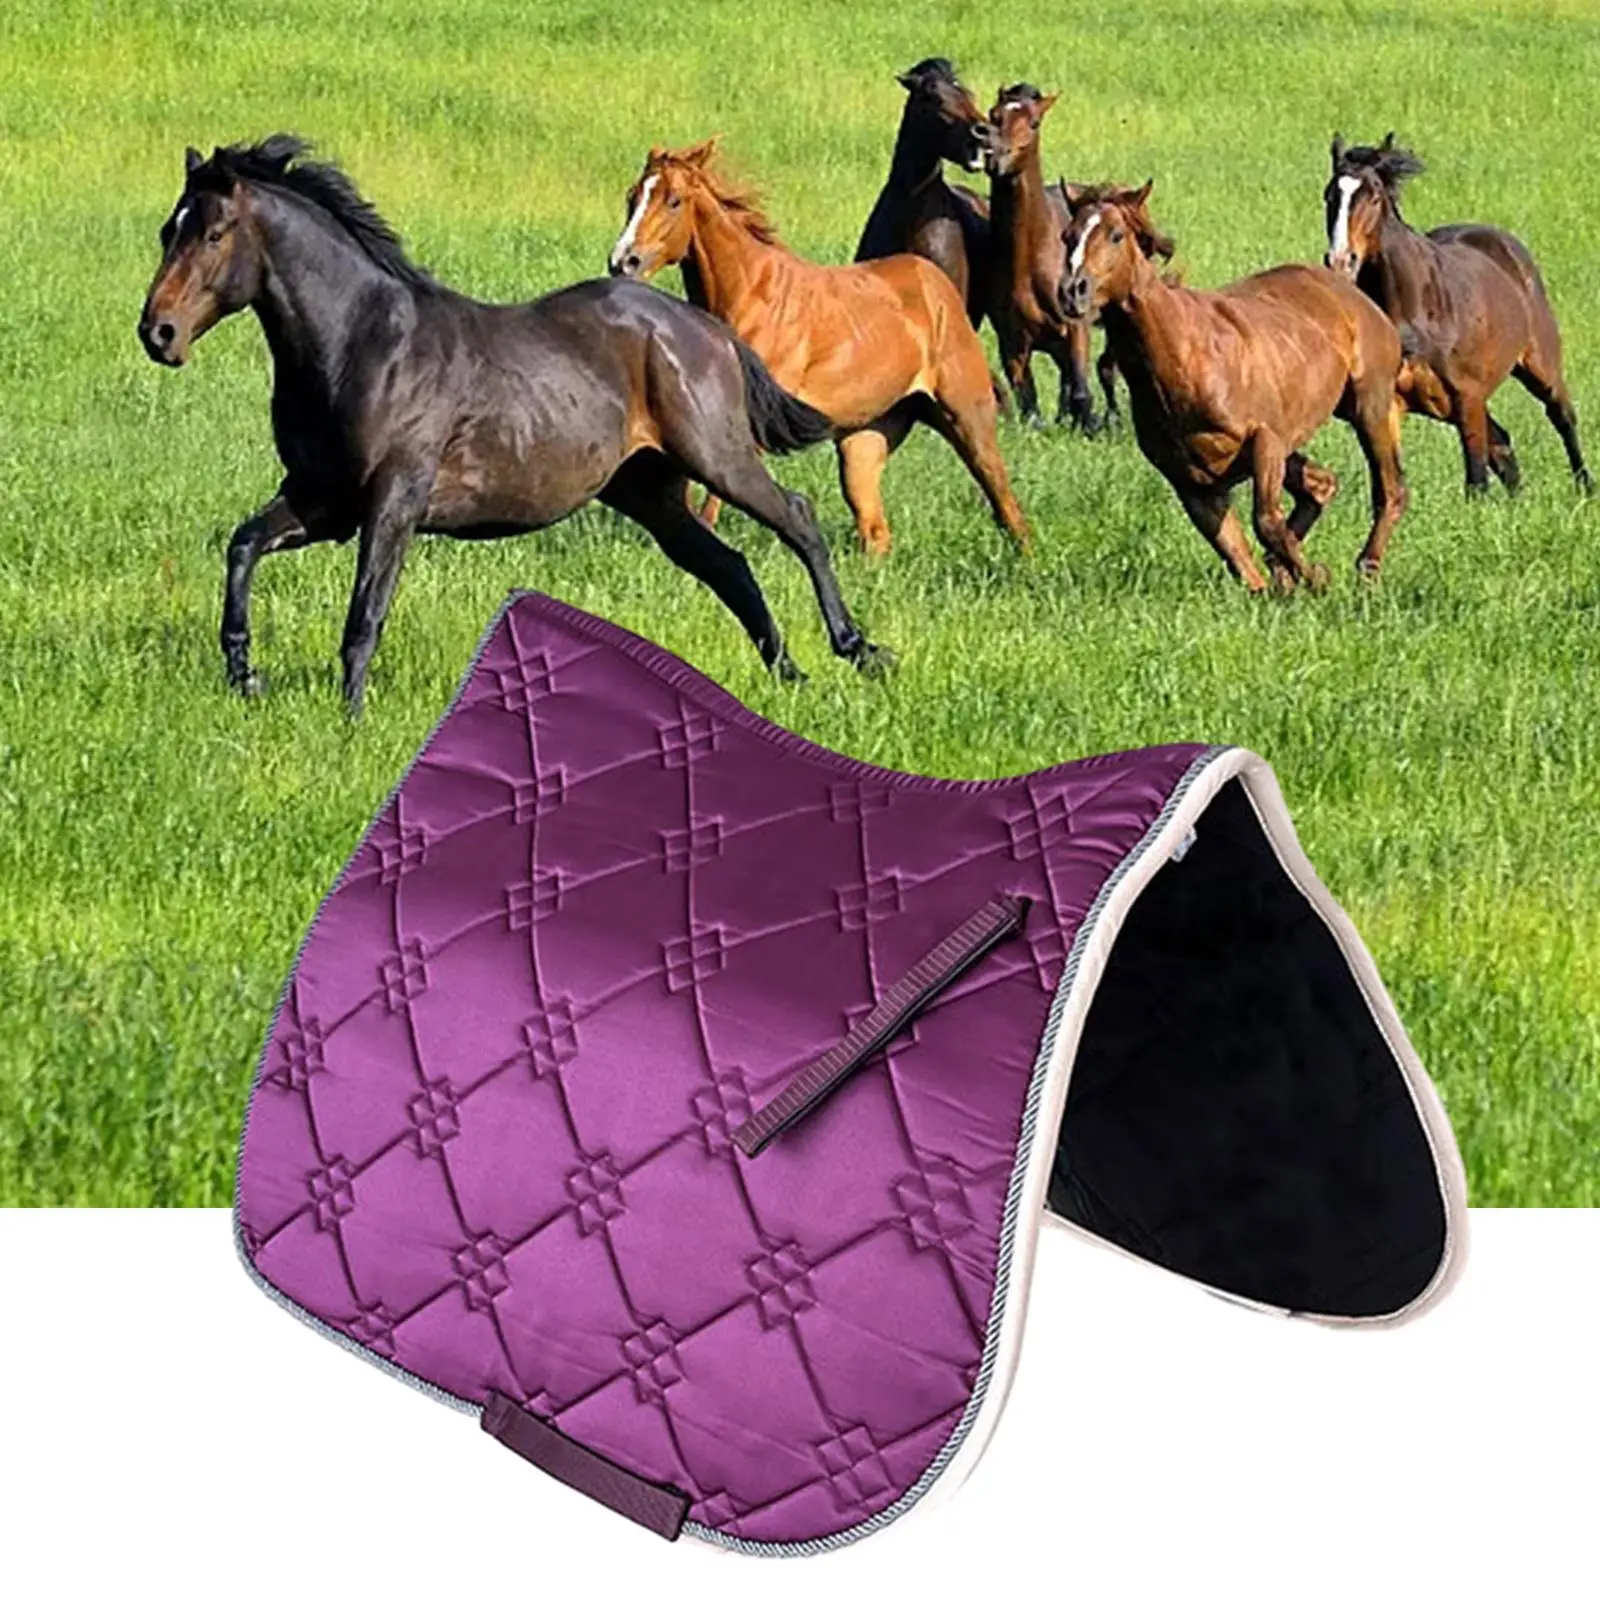 Horse Saddle Pad Comfortable Sponge Lining Padding Accessories Nonslip Breathable Shock Absorbing Riding Protection Dressage Pad